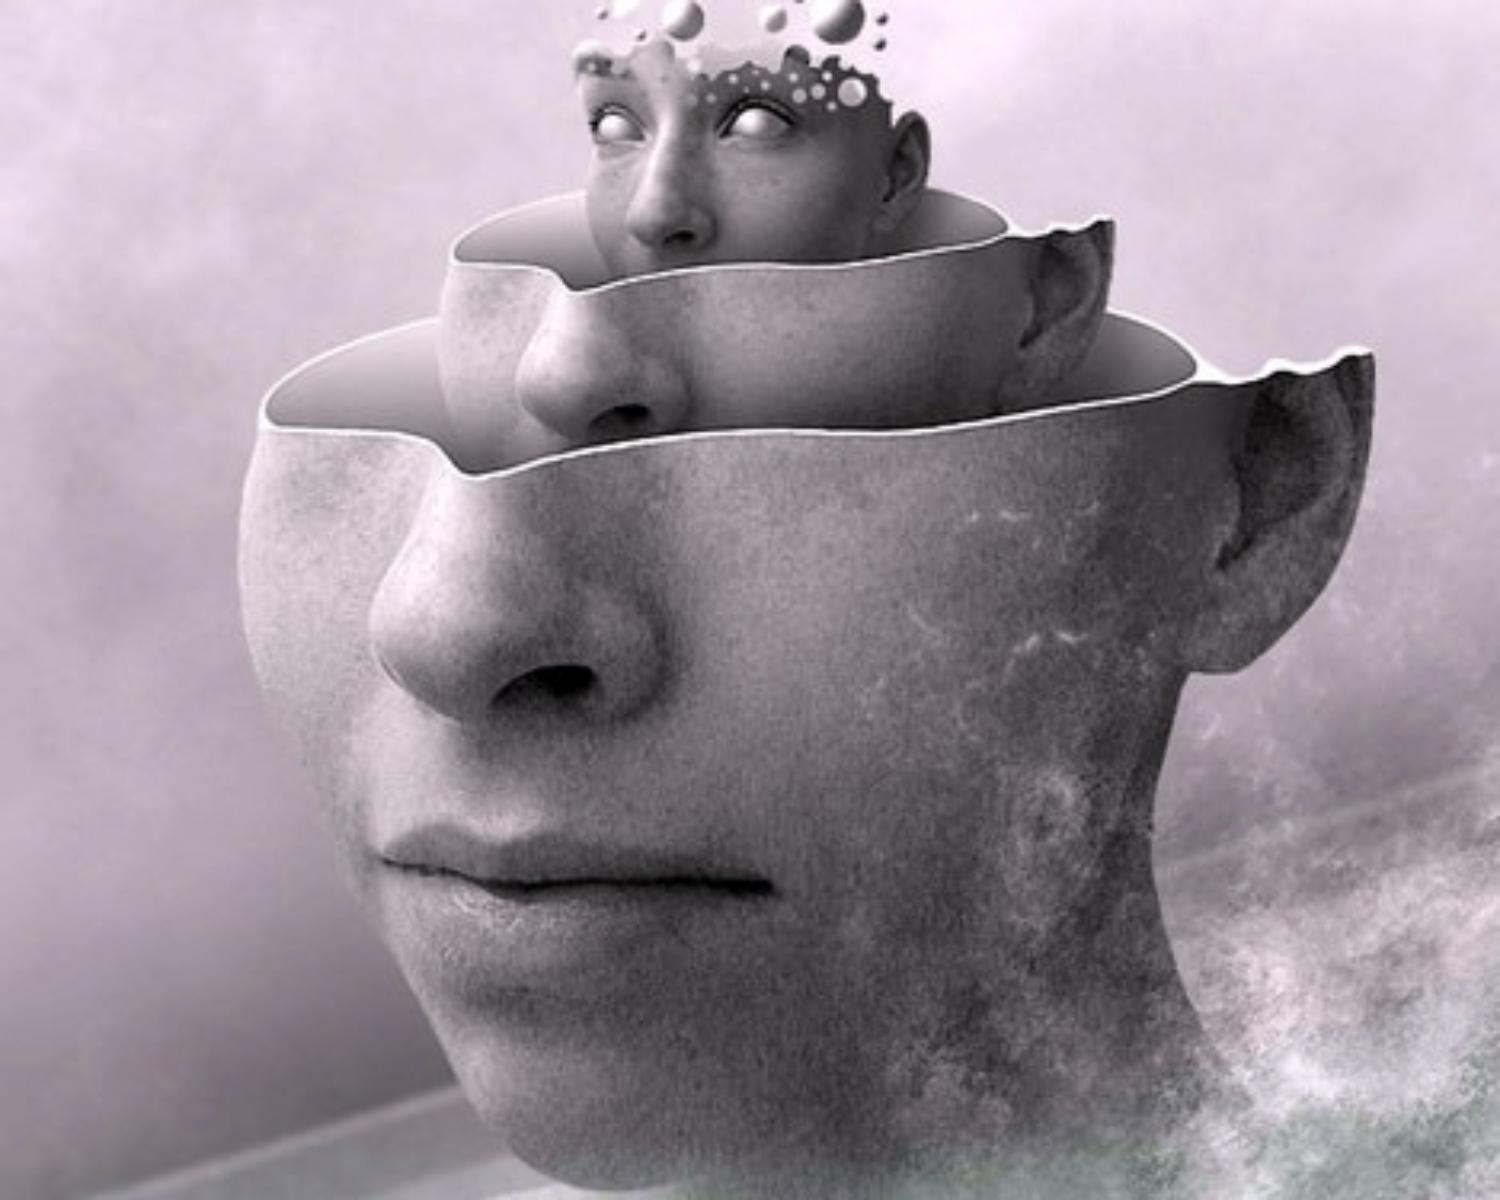 How other people think by getting to know your own mind better.